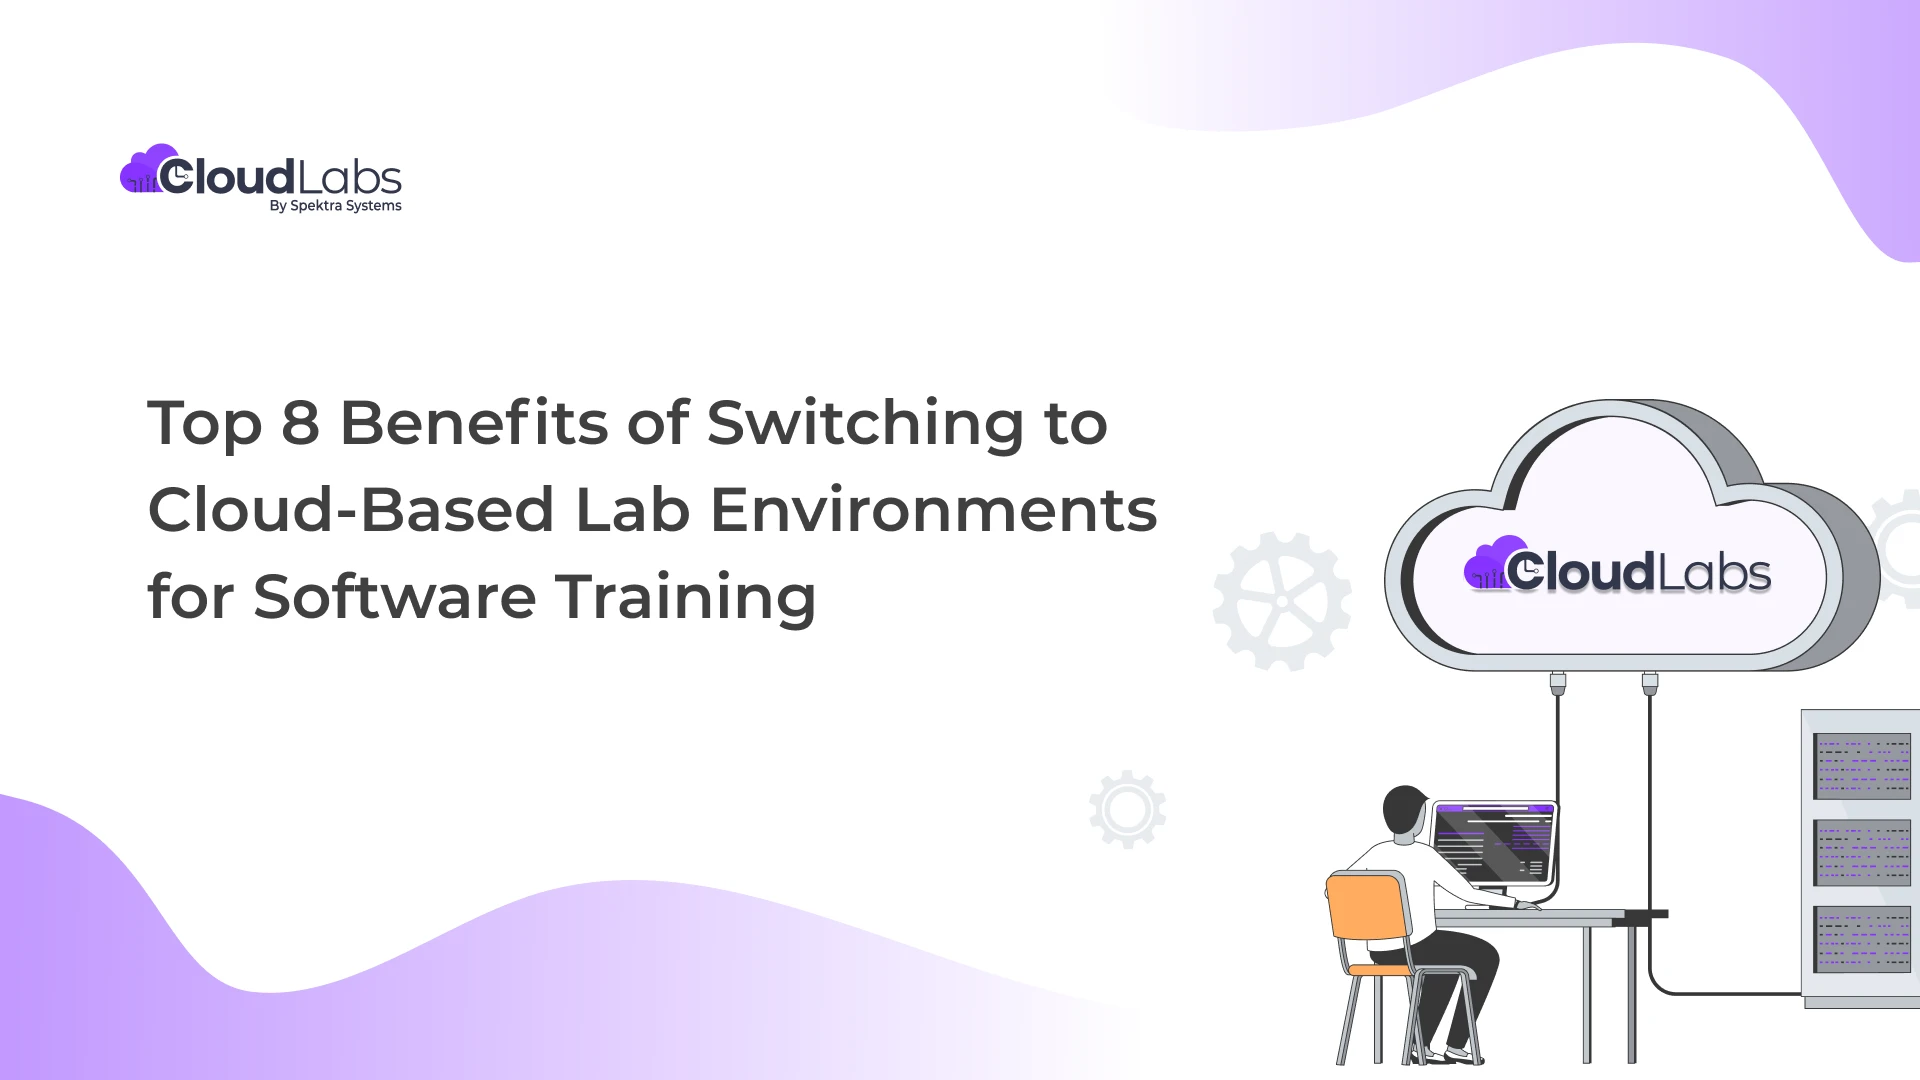 Top 8 Benefits of Switching to Cloud-Based Lab Environments for Software Training